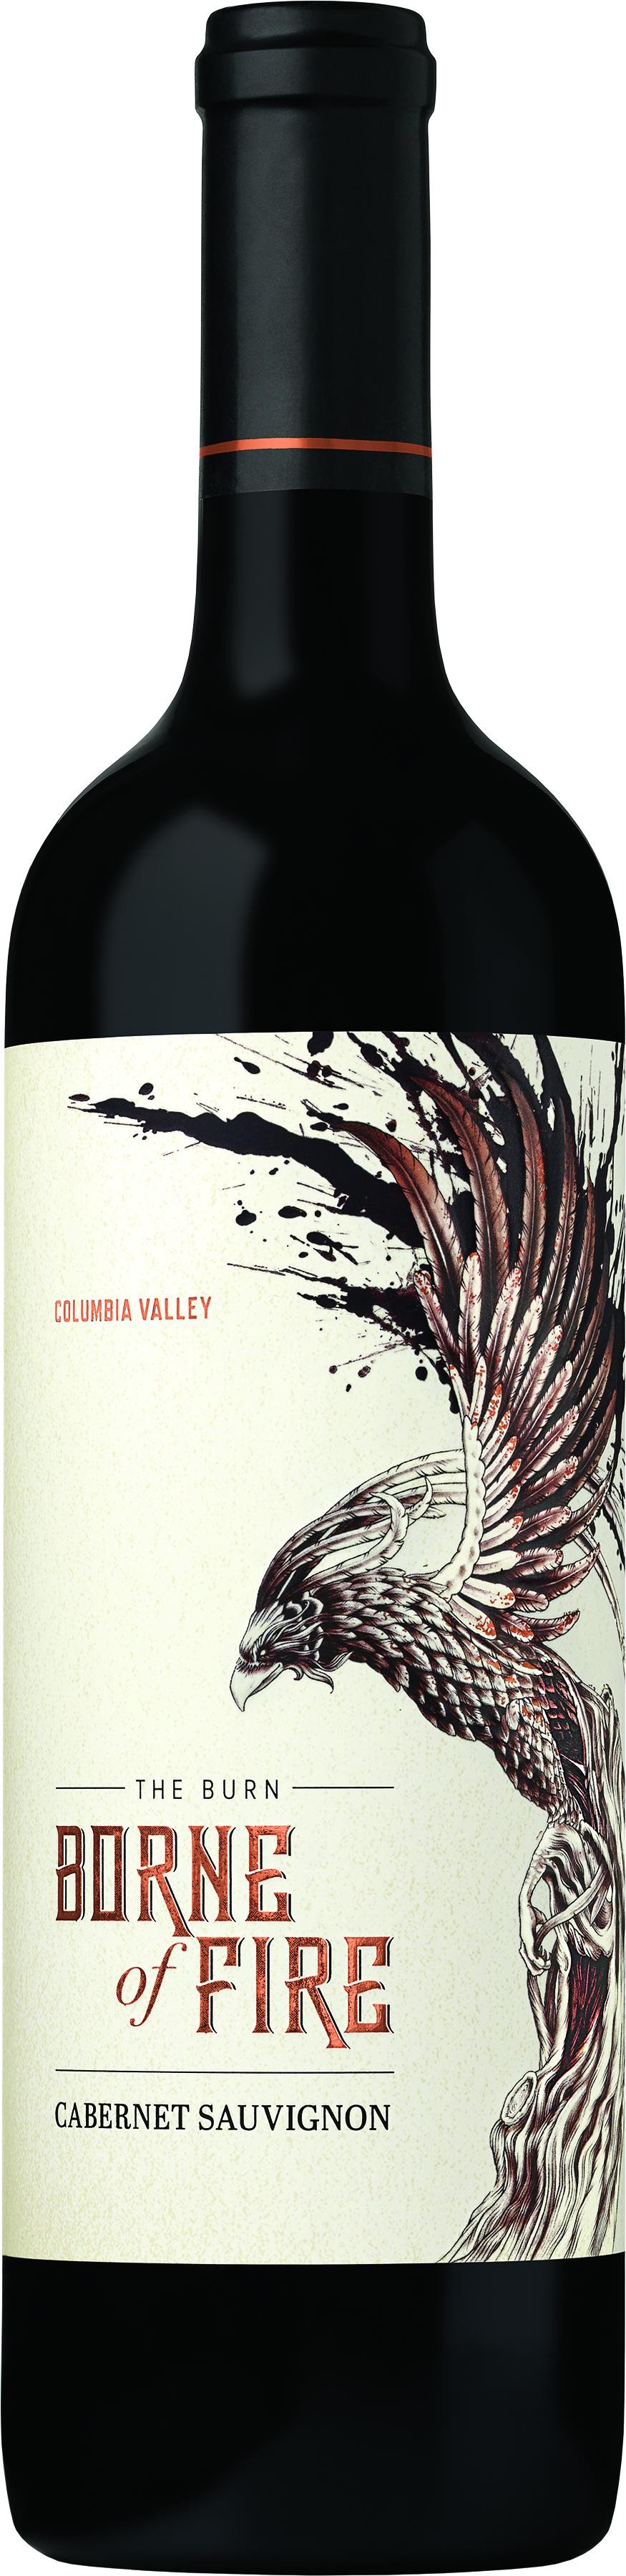 Borne of Fire Columbia Valley Cabernet Sauvignon - Red Wine from Washington - 750ml Bottle